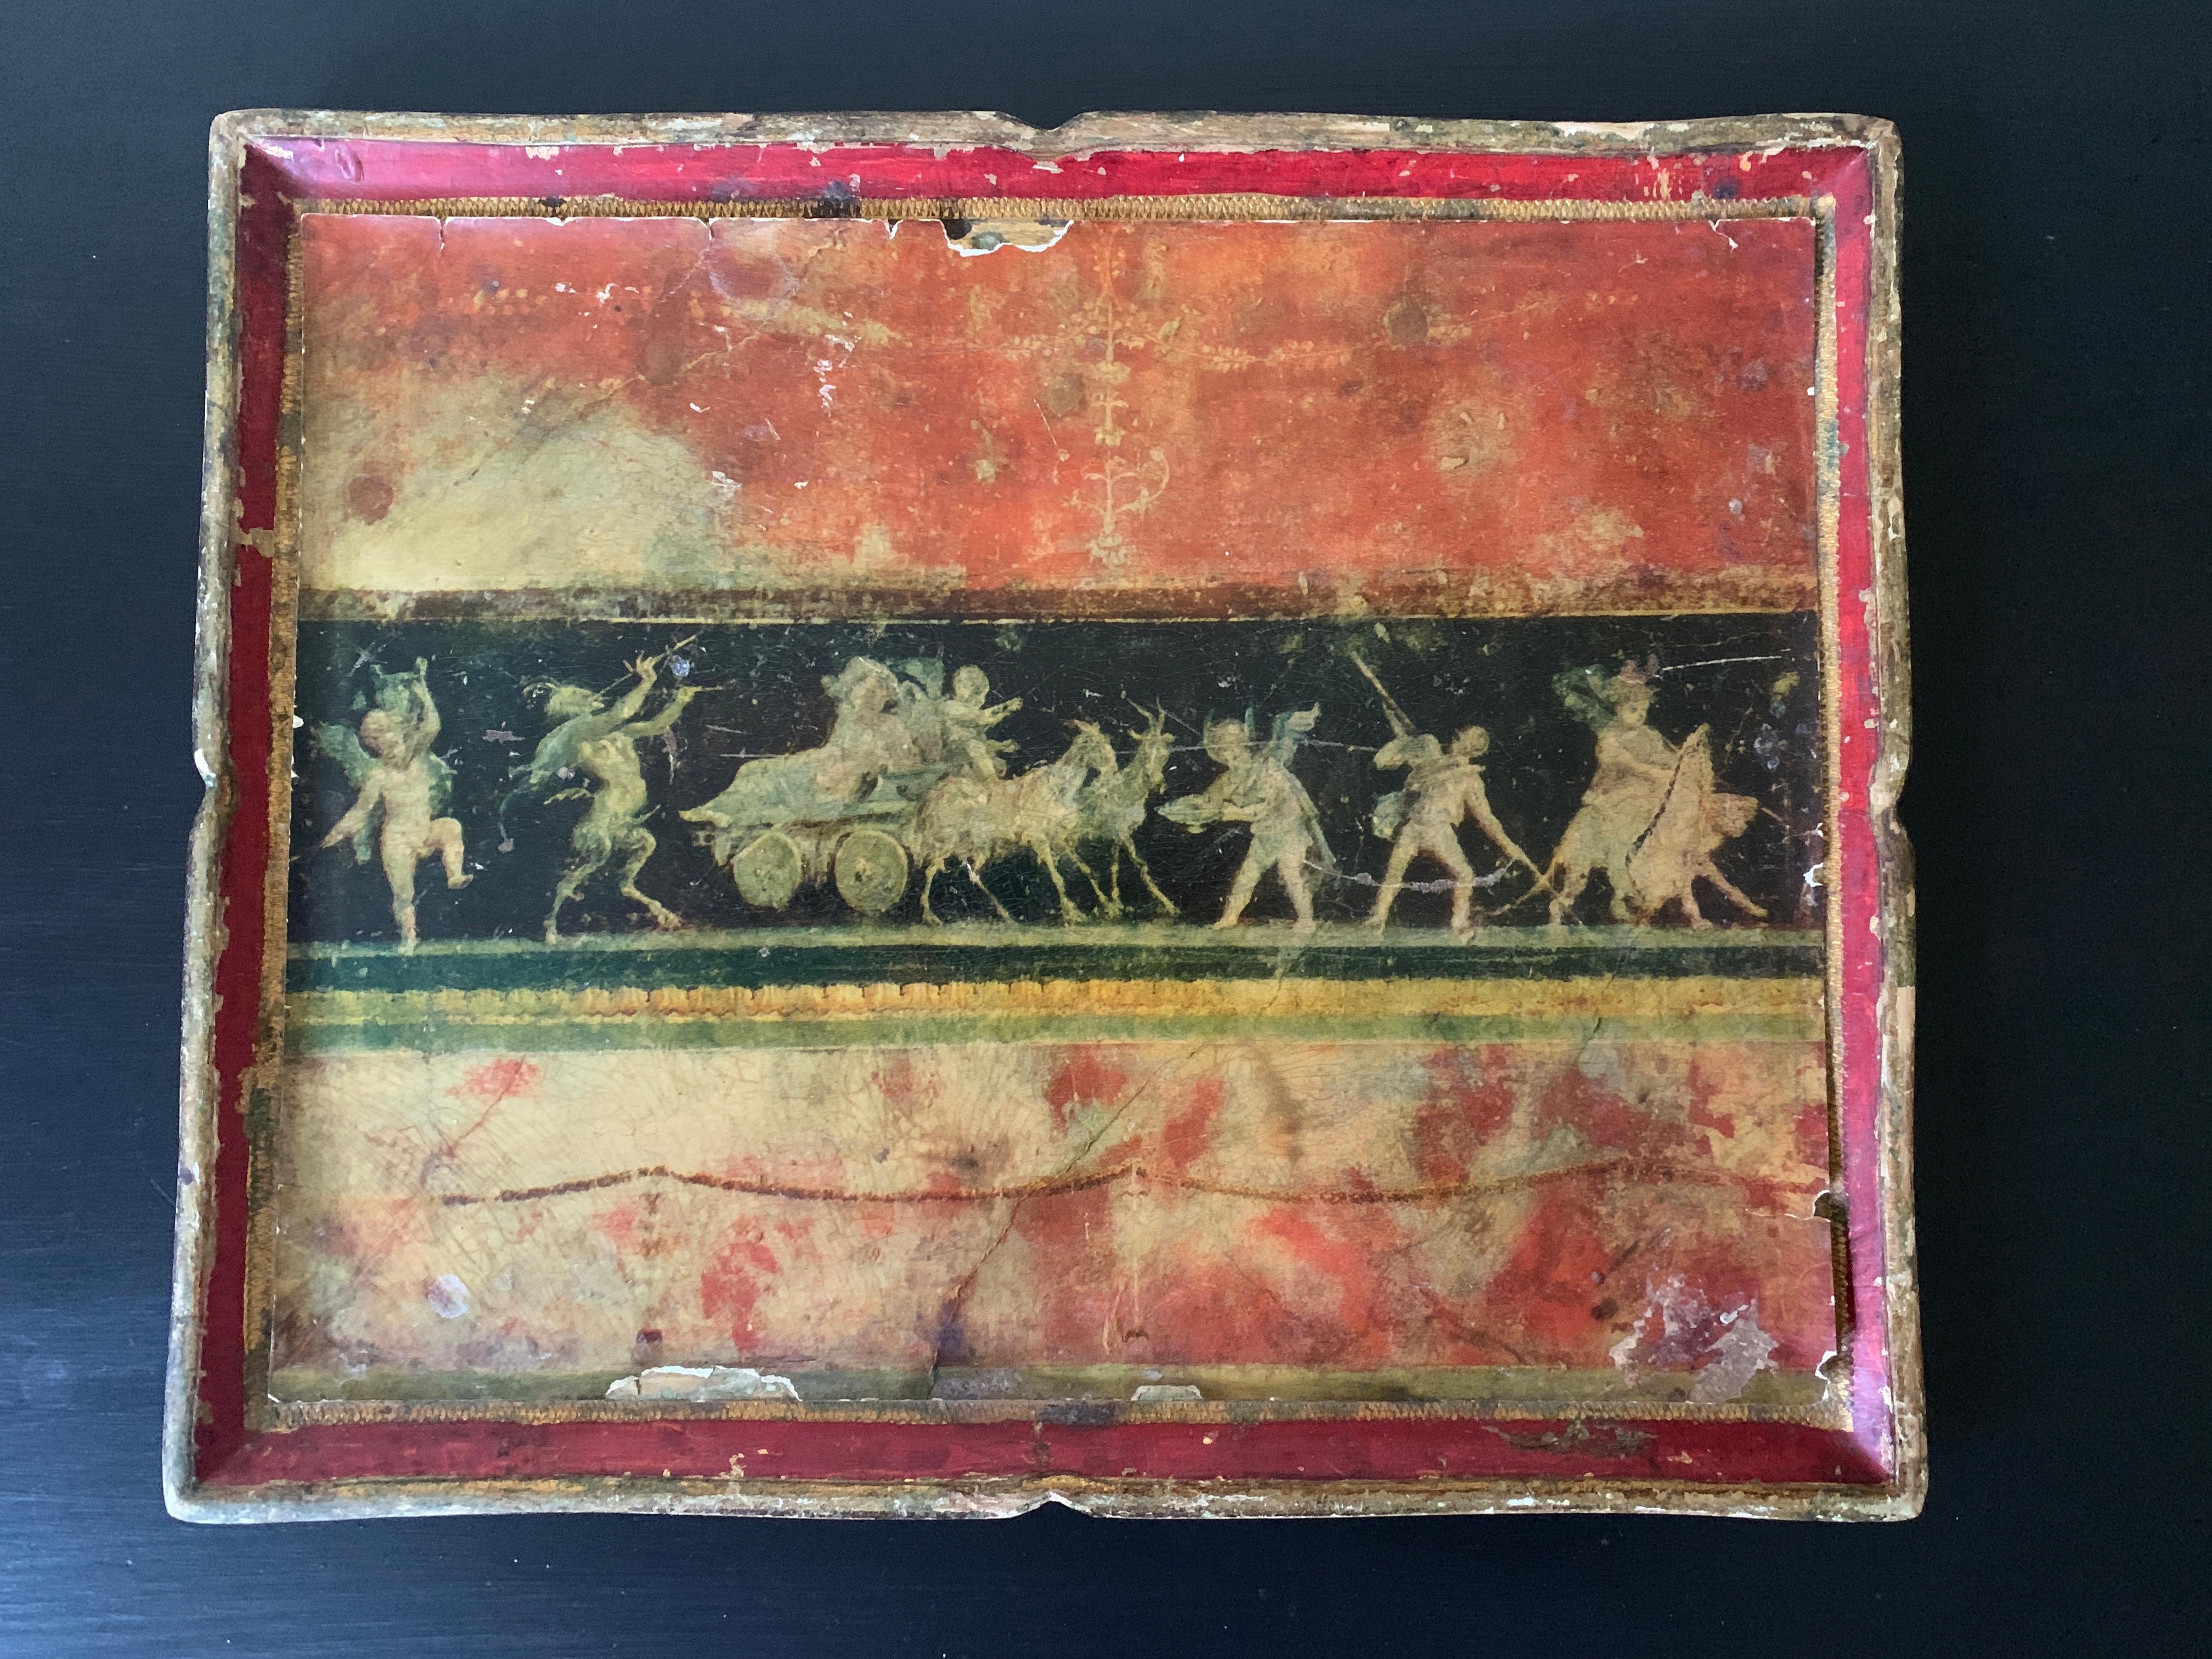 A beautiful Italian Florentine tray featuring a neoclassical scene with putti and mythological figures. This piece would add character and charm to any space.

Italy, Circa 1960s

Giltwood with red, gold, a nd black papier-mâché 

Measures: 15